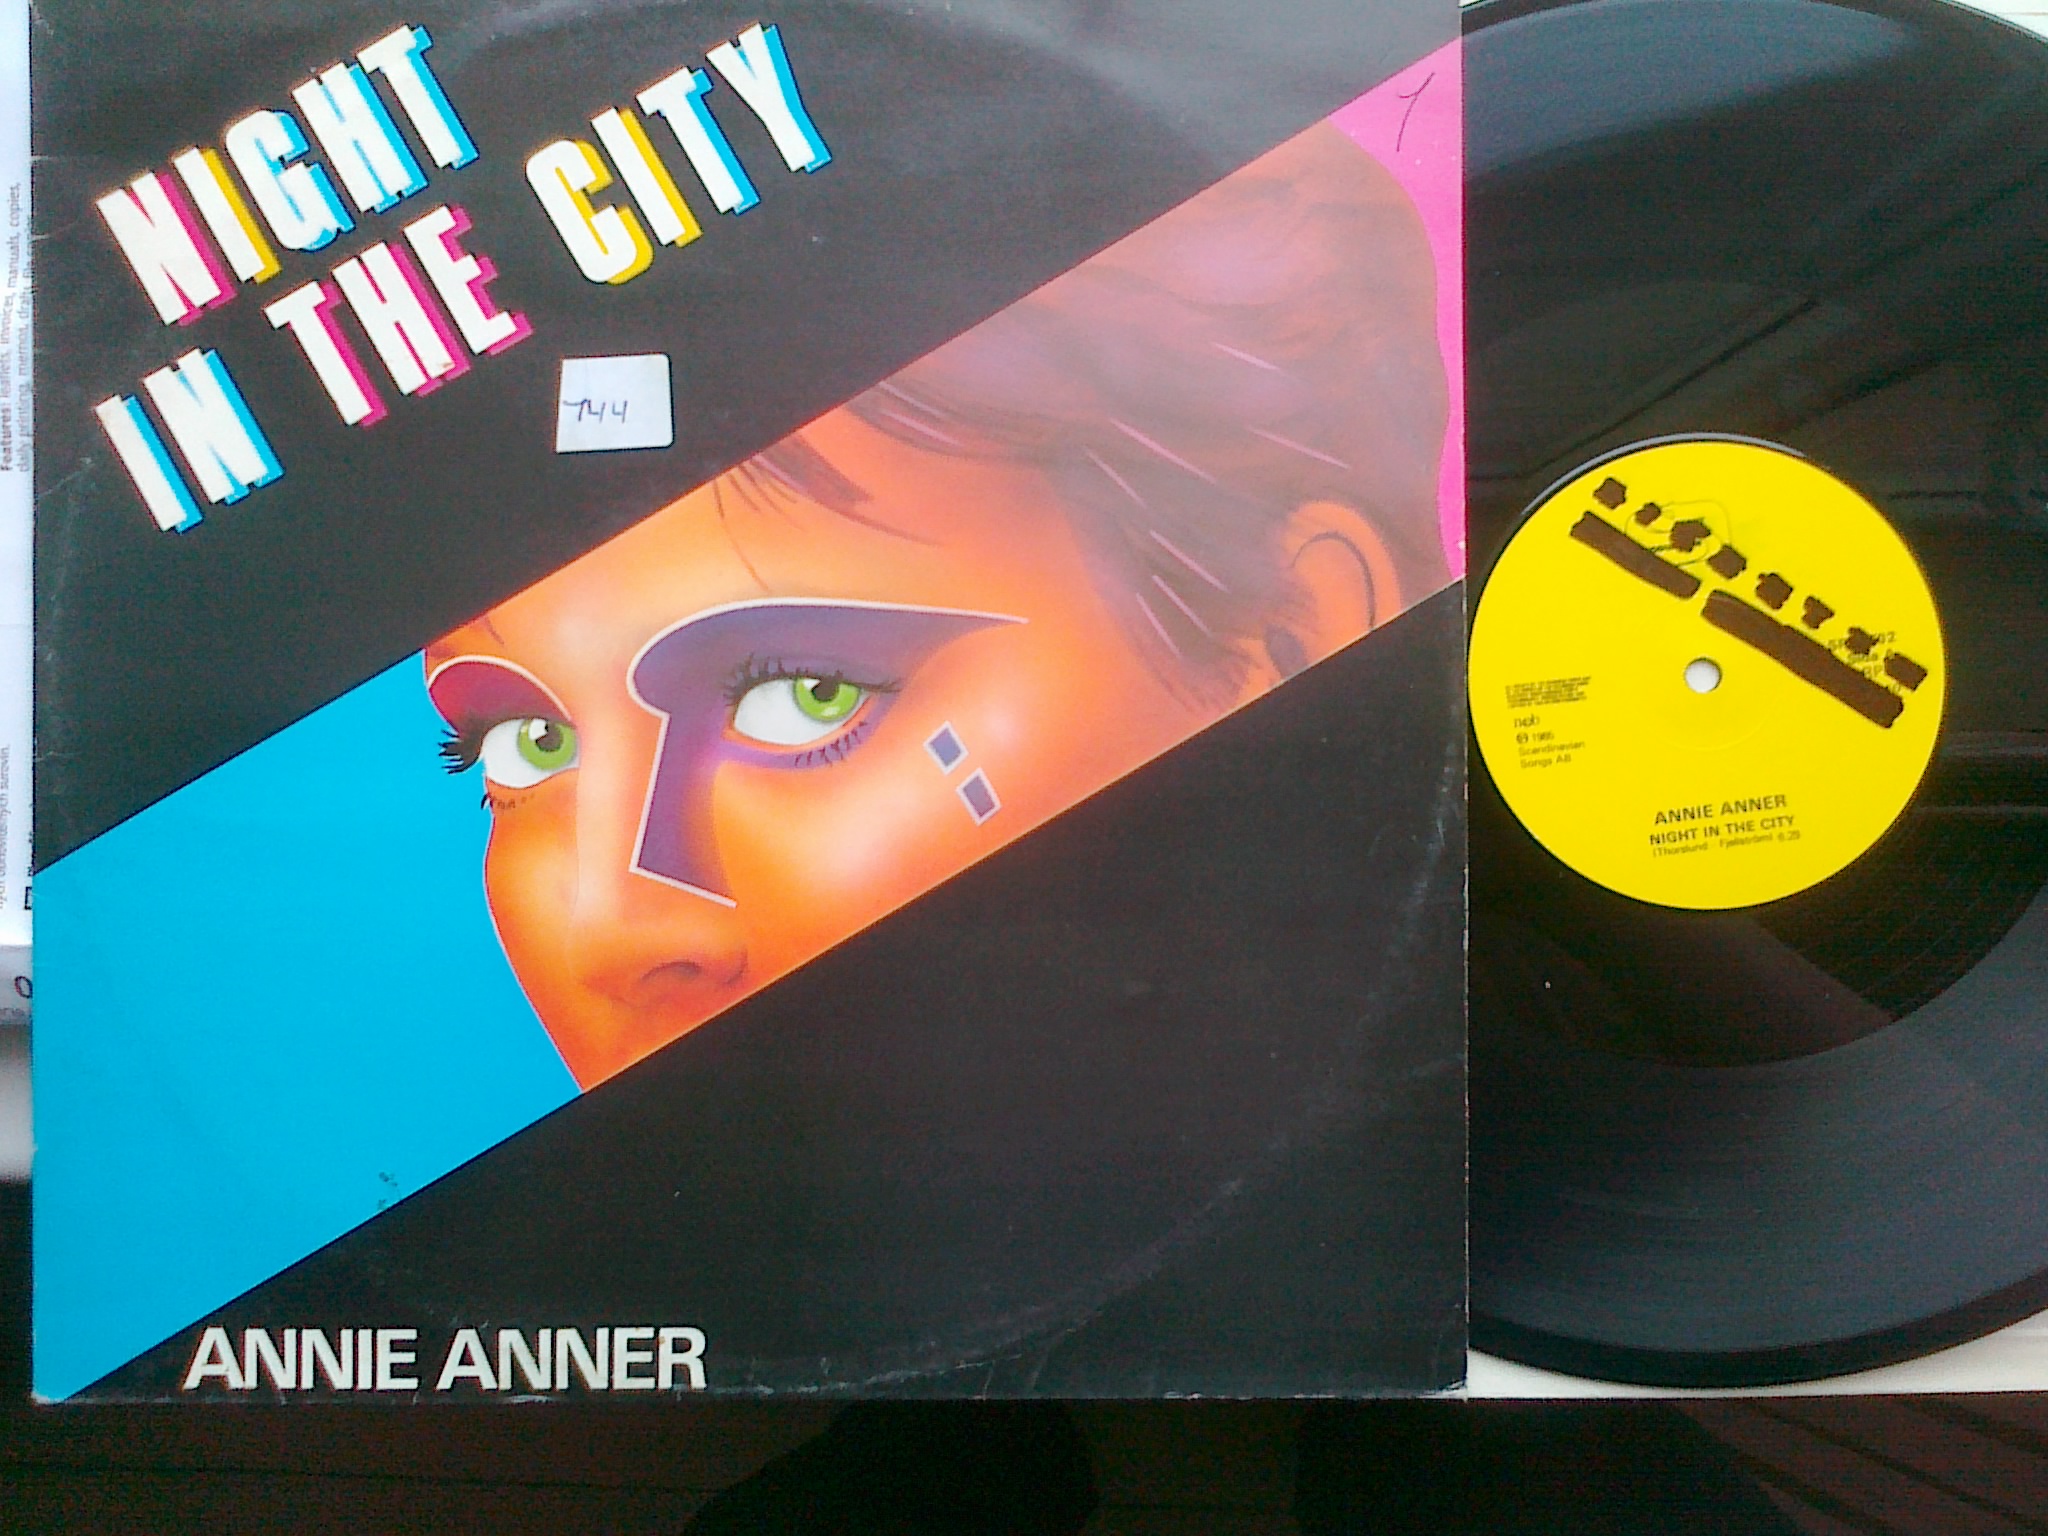 Annie Anner - Night In The City